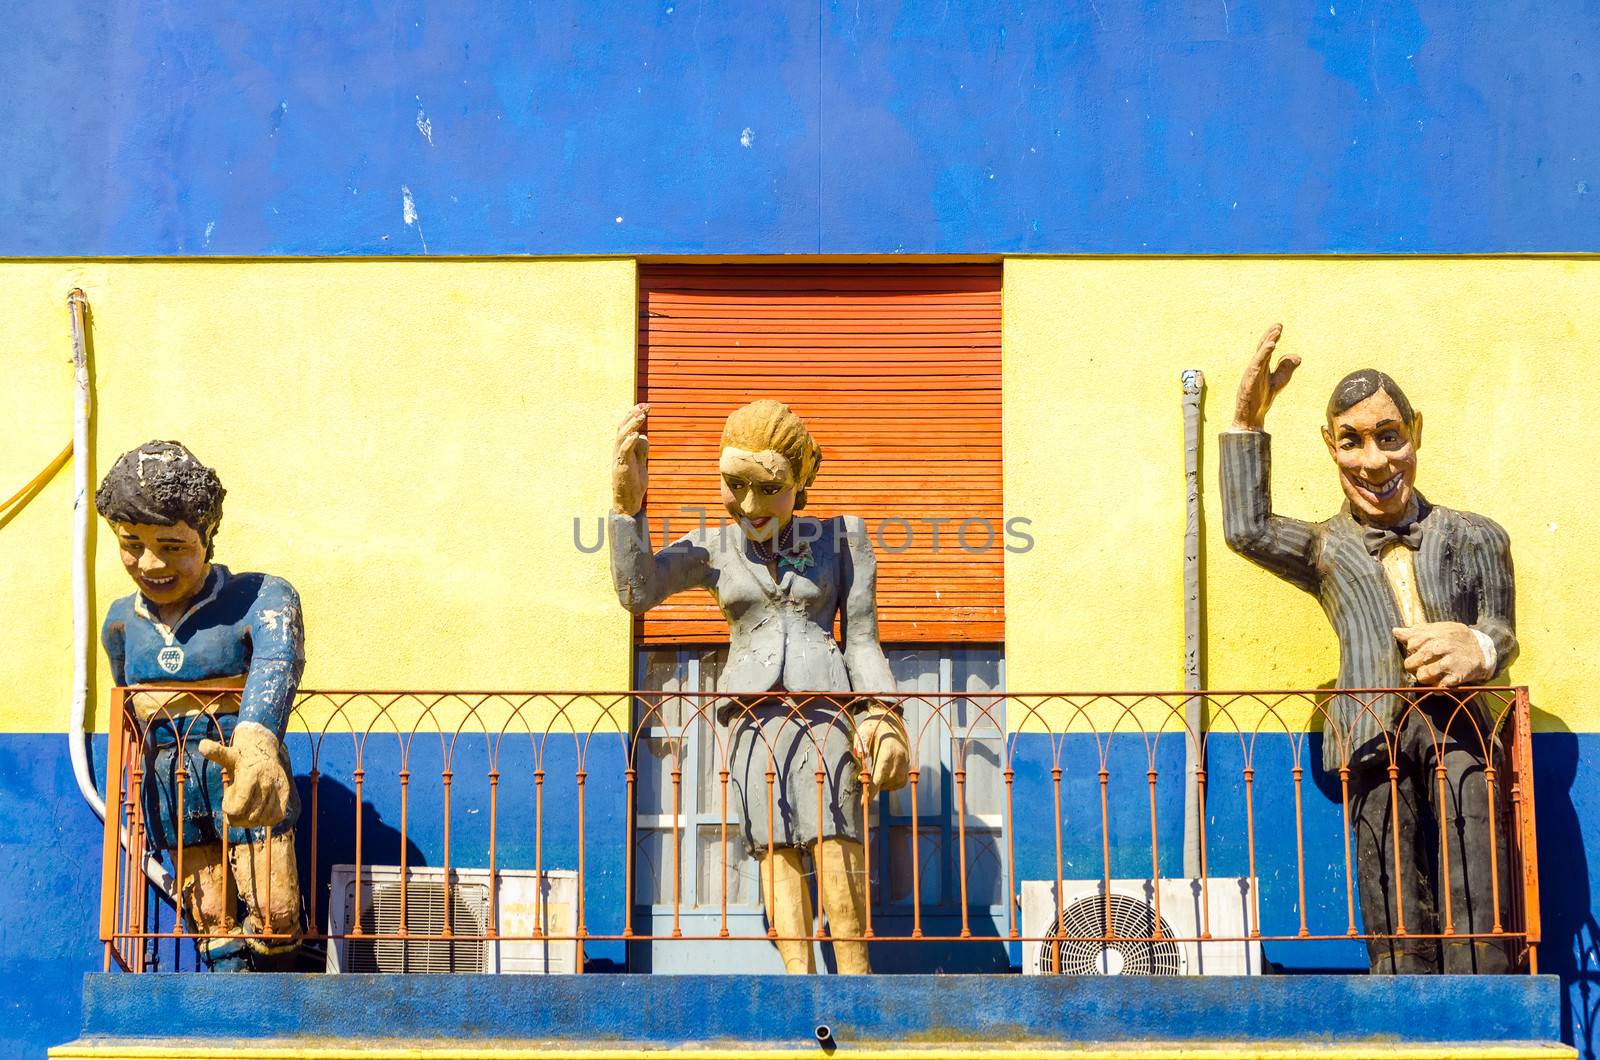 Statues with a yellow and blue wall in La Boca neighborhood of Buenos Aires, Argentina